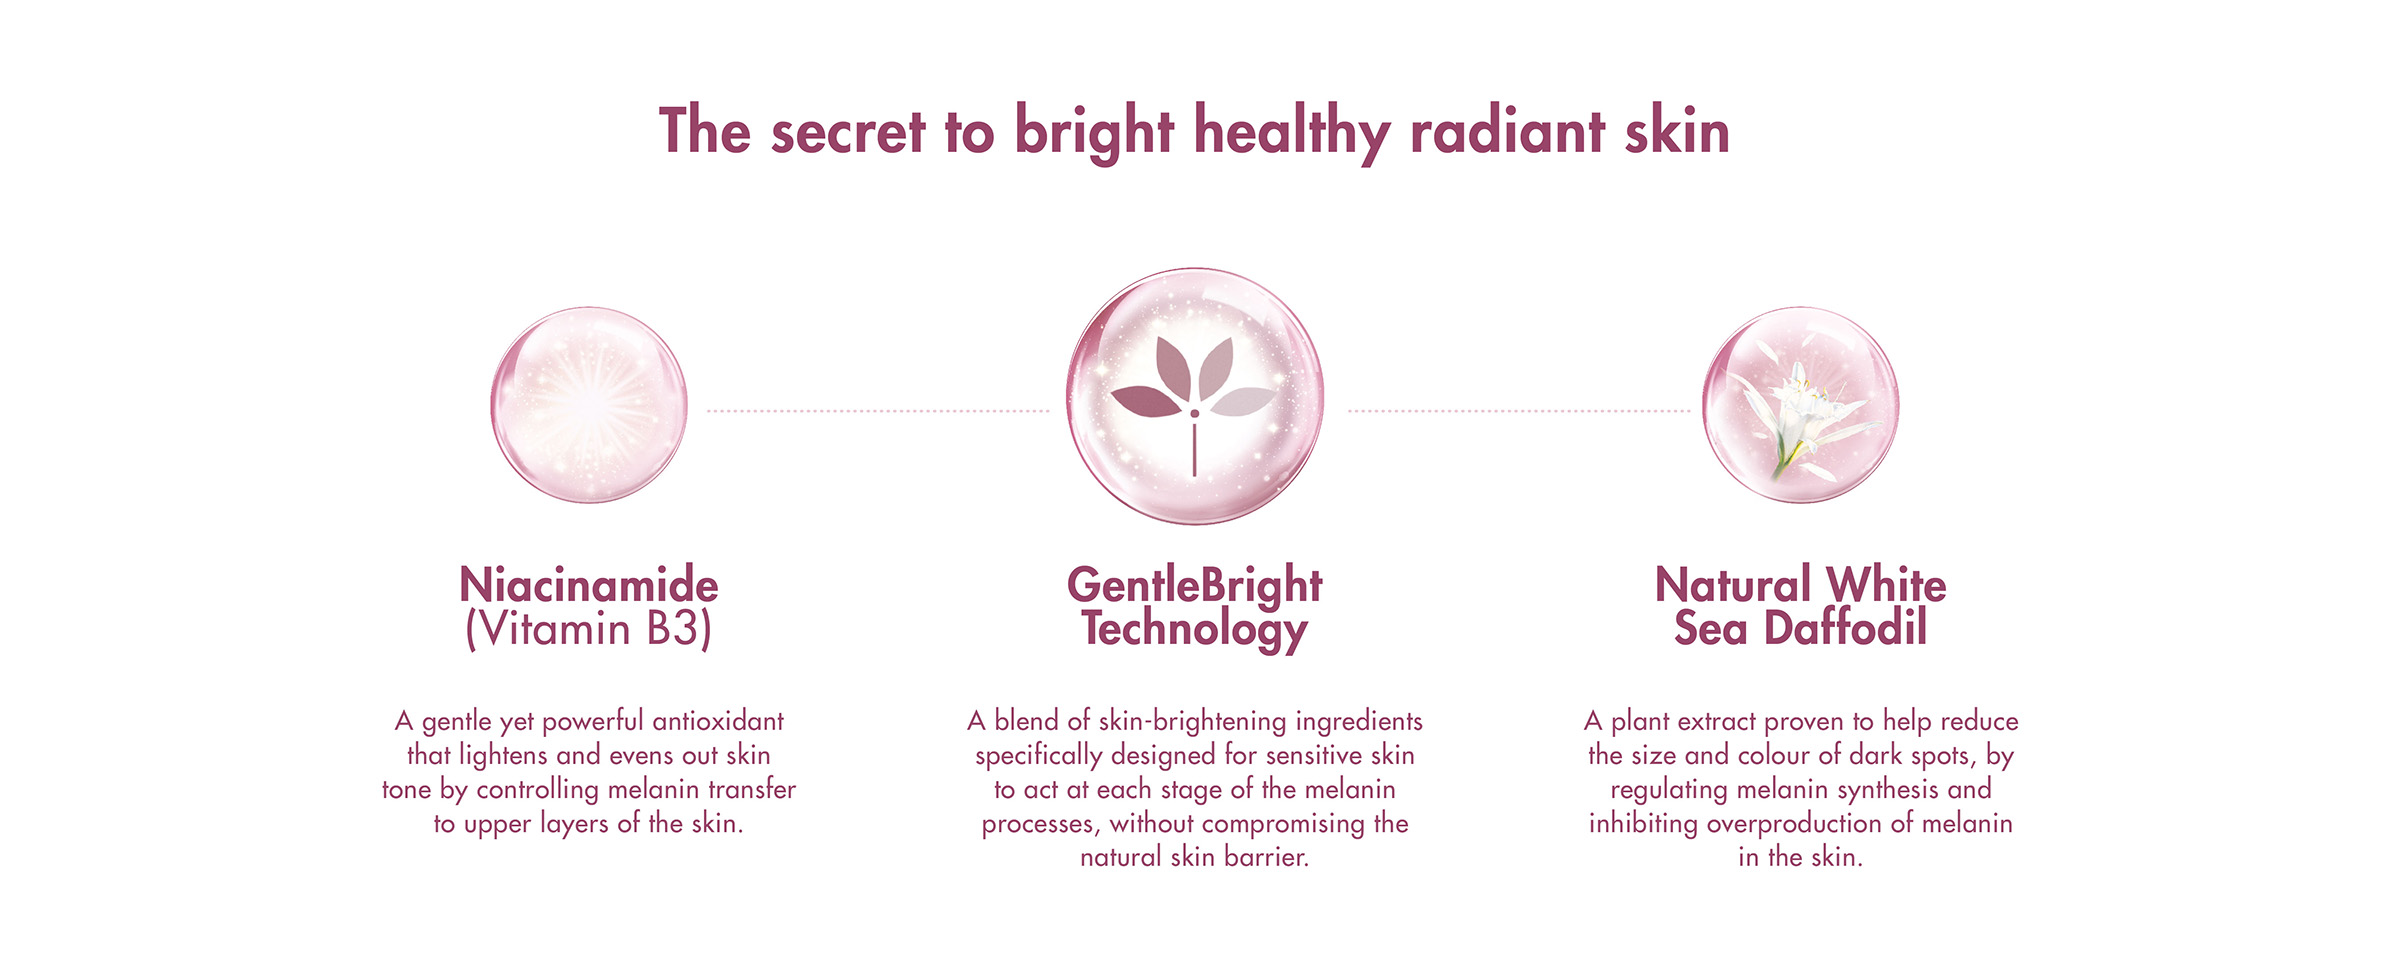 The secret to bright healthy radiance skin